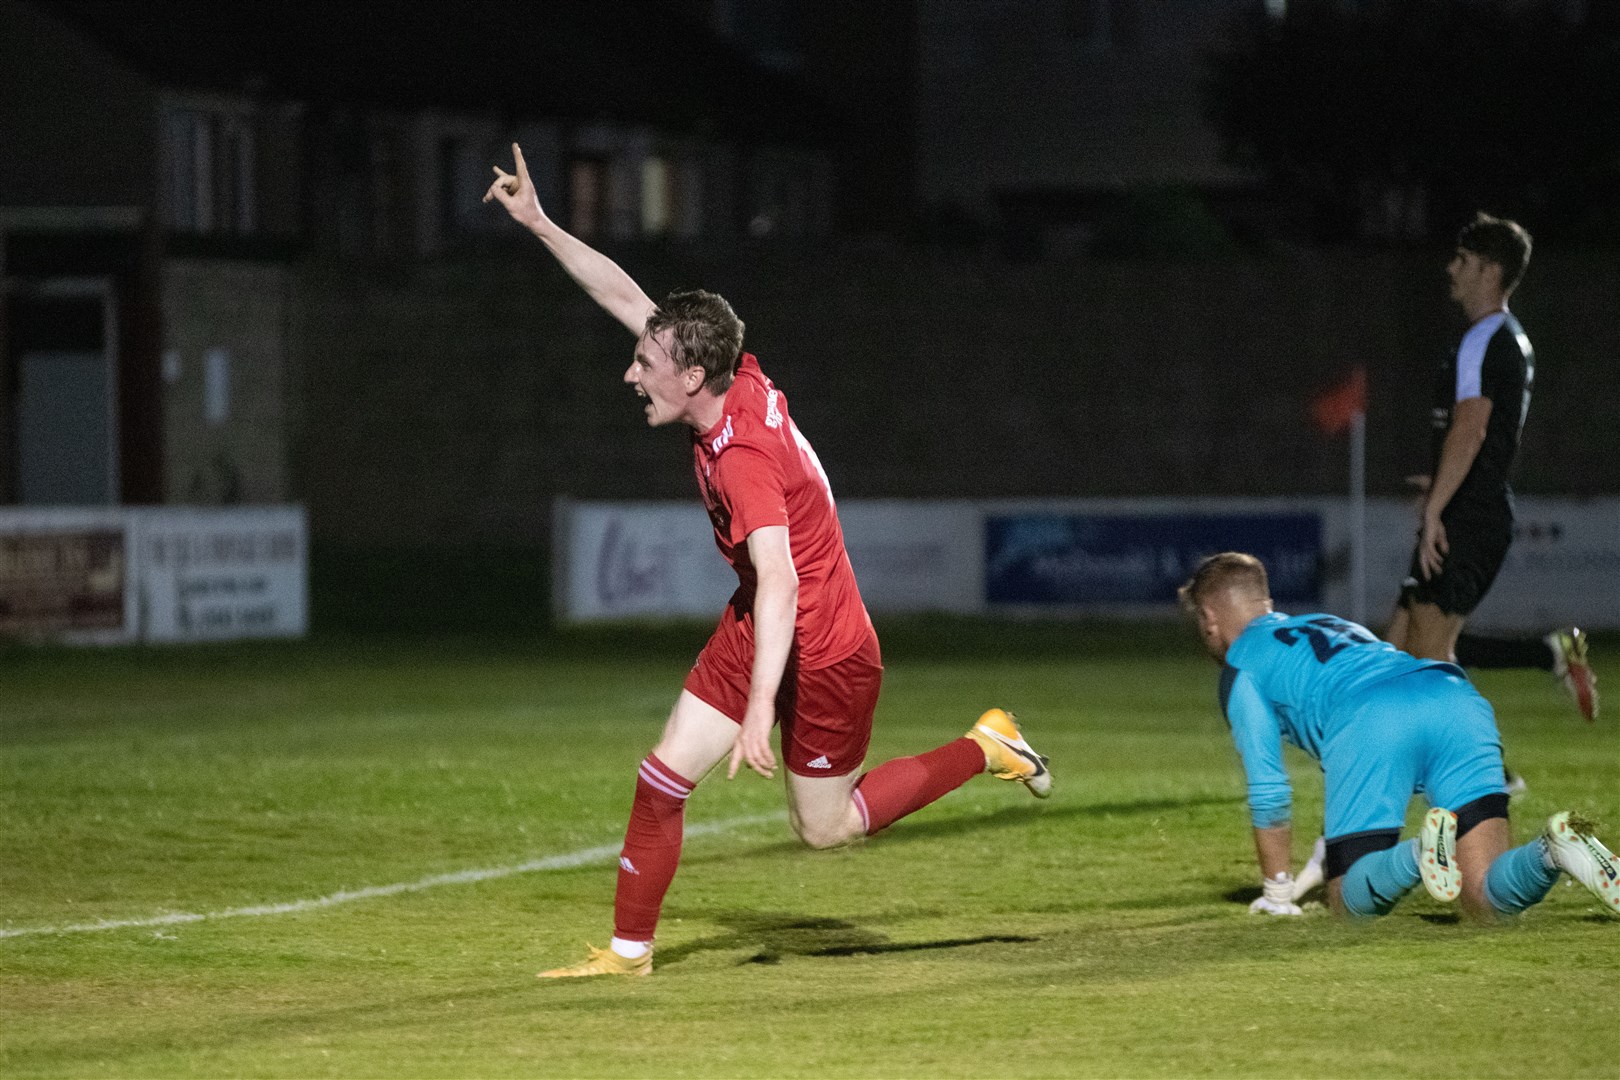 Lossiemouth's Baylee Campbell scores the home side's fourth goal of the evening...Lossiemouth FC (4) vs Strathspey Thistle (2) - Highland Football League 22/23 - Grant Park, Lossiemouth 24/08/2022...Picture: Daniel Forsyth..